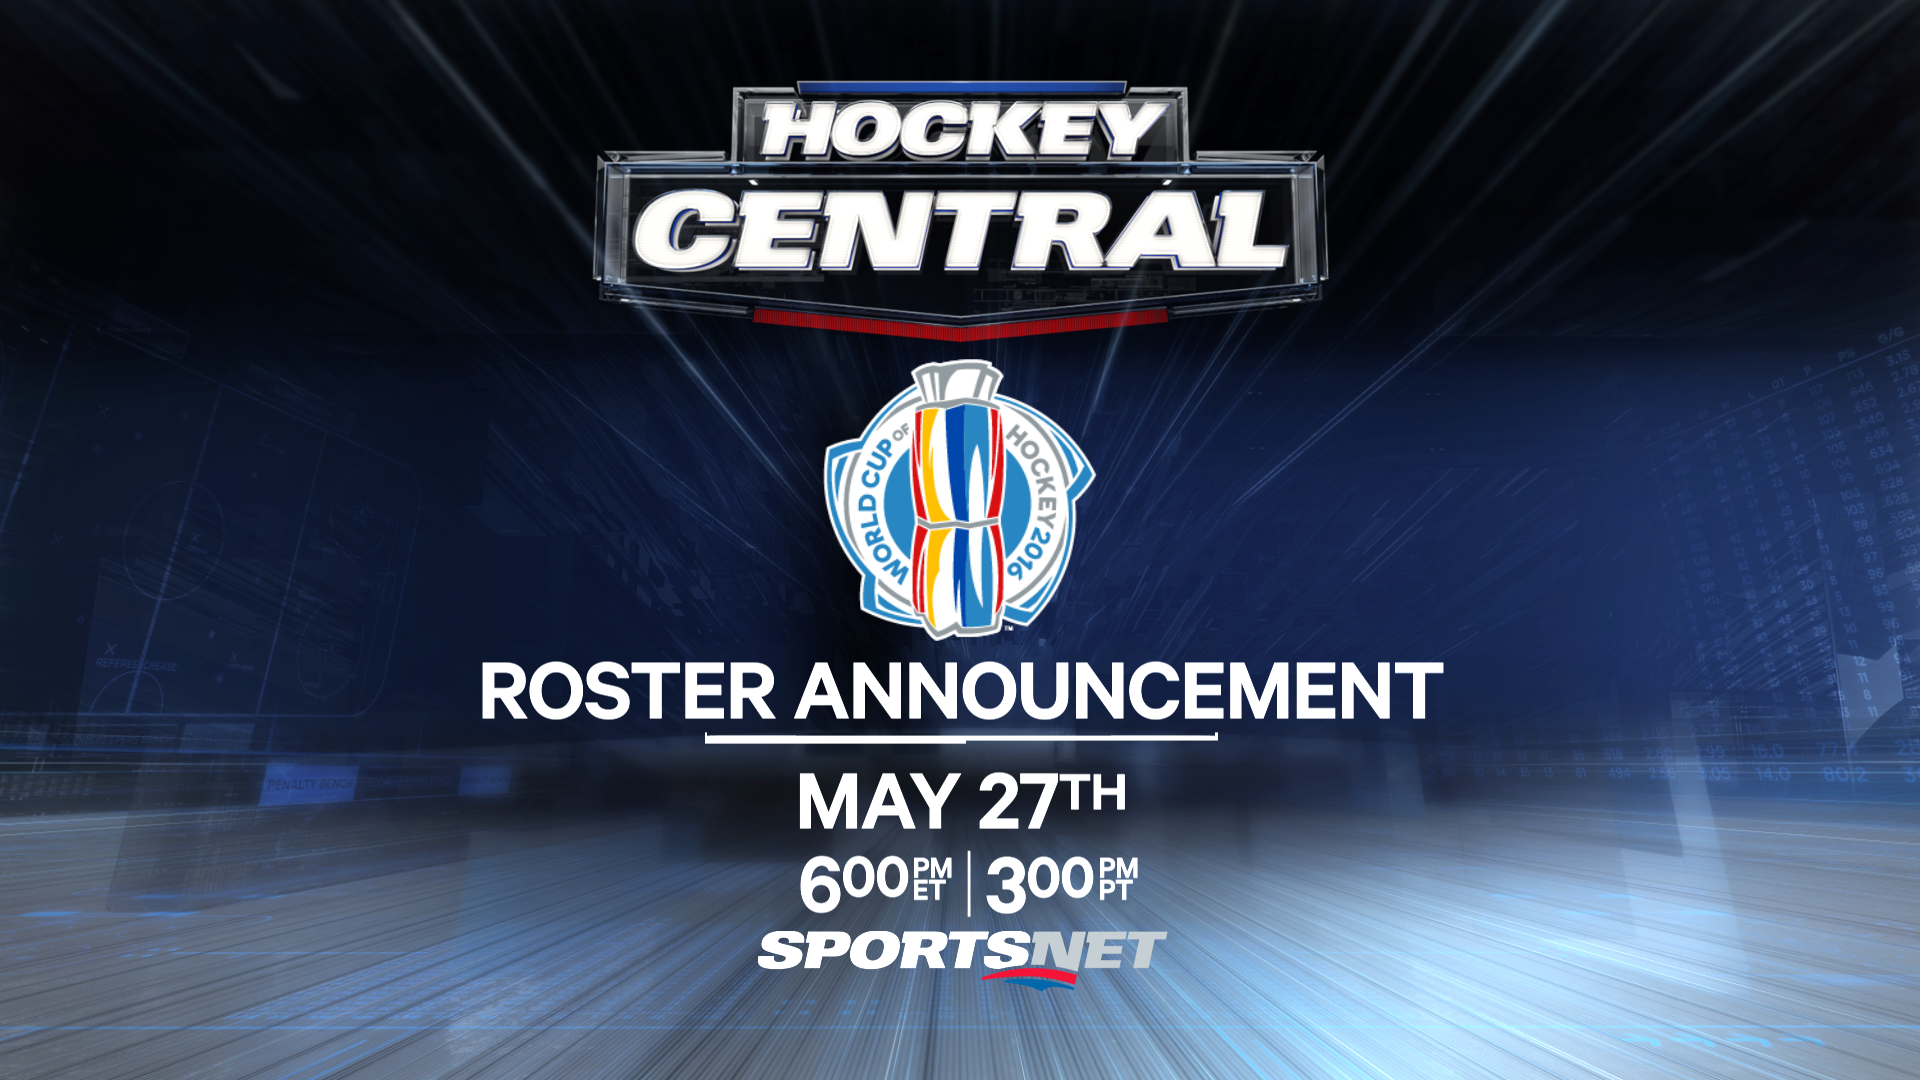 Hockey Central World Cup of hockey roster announcement.